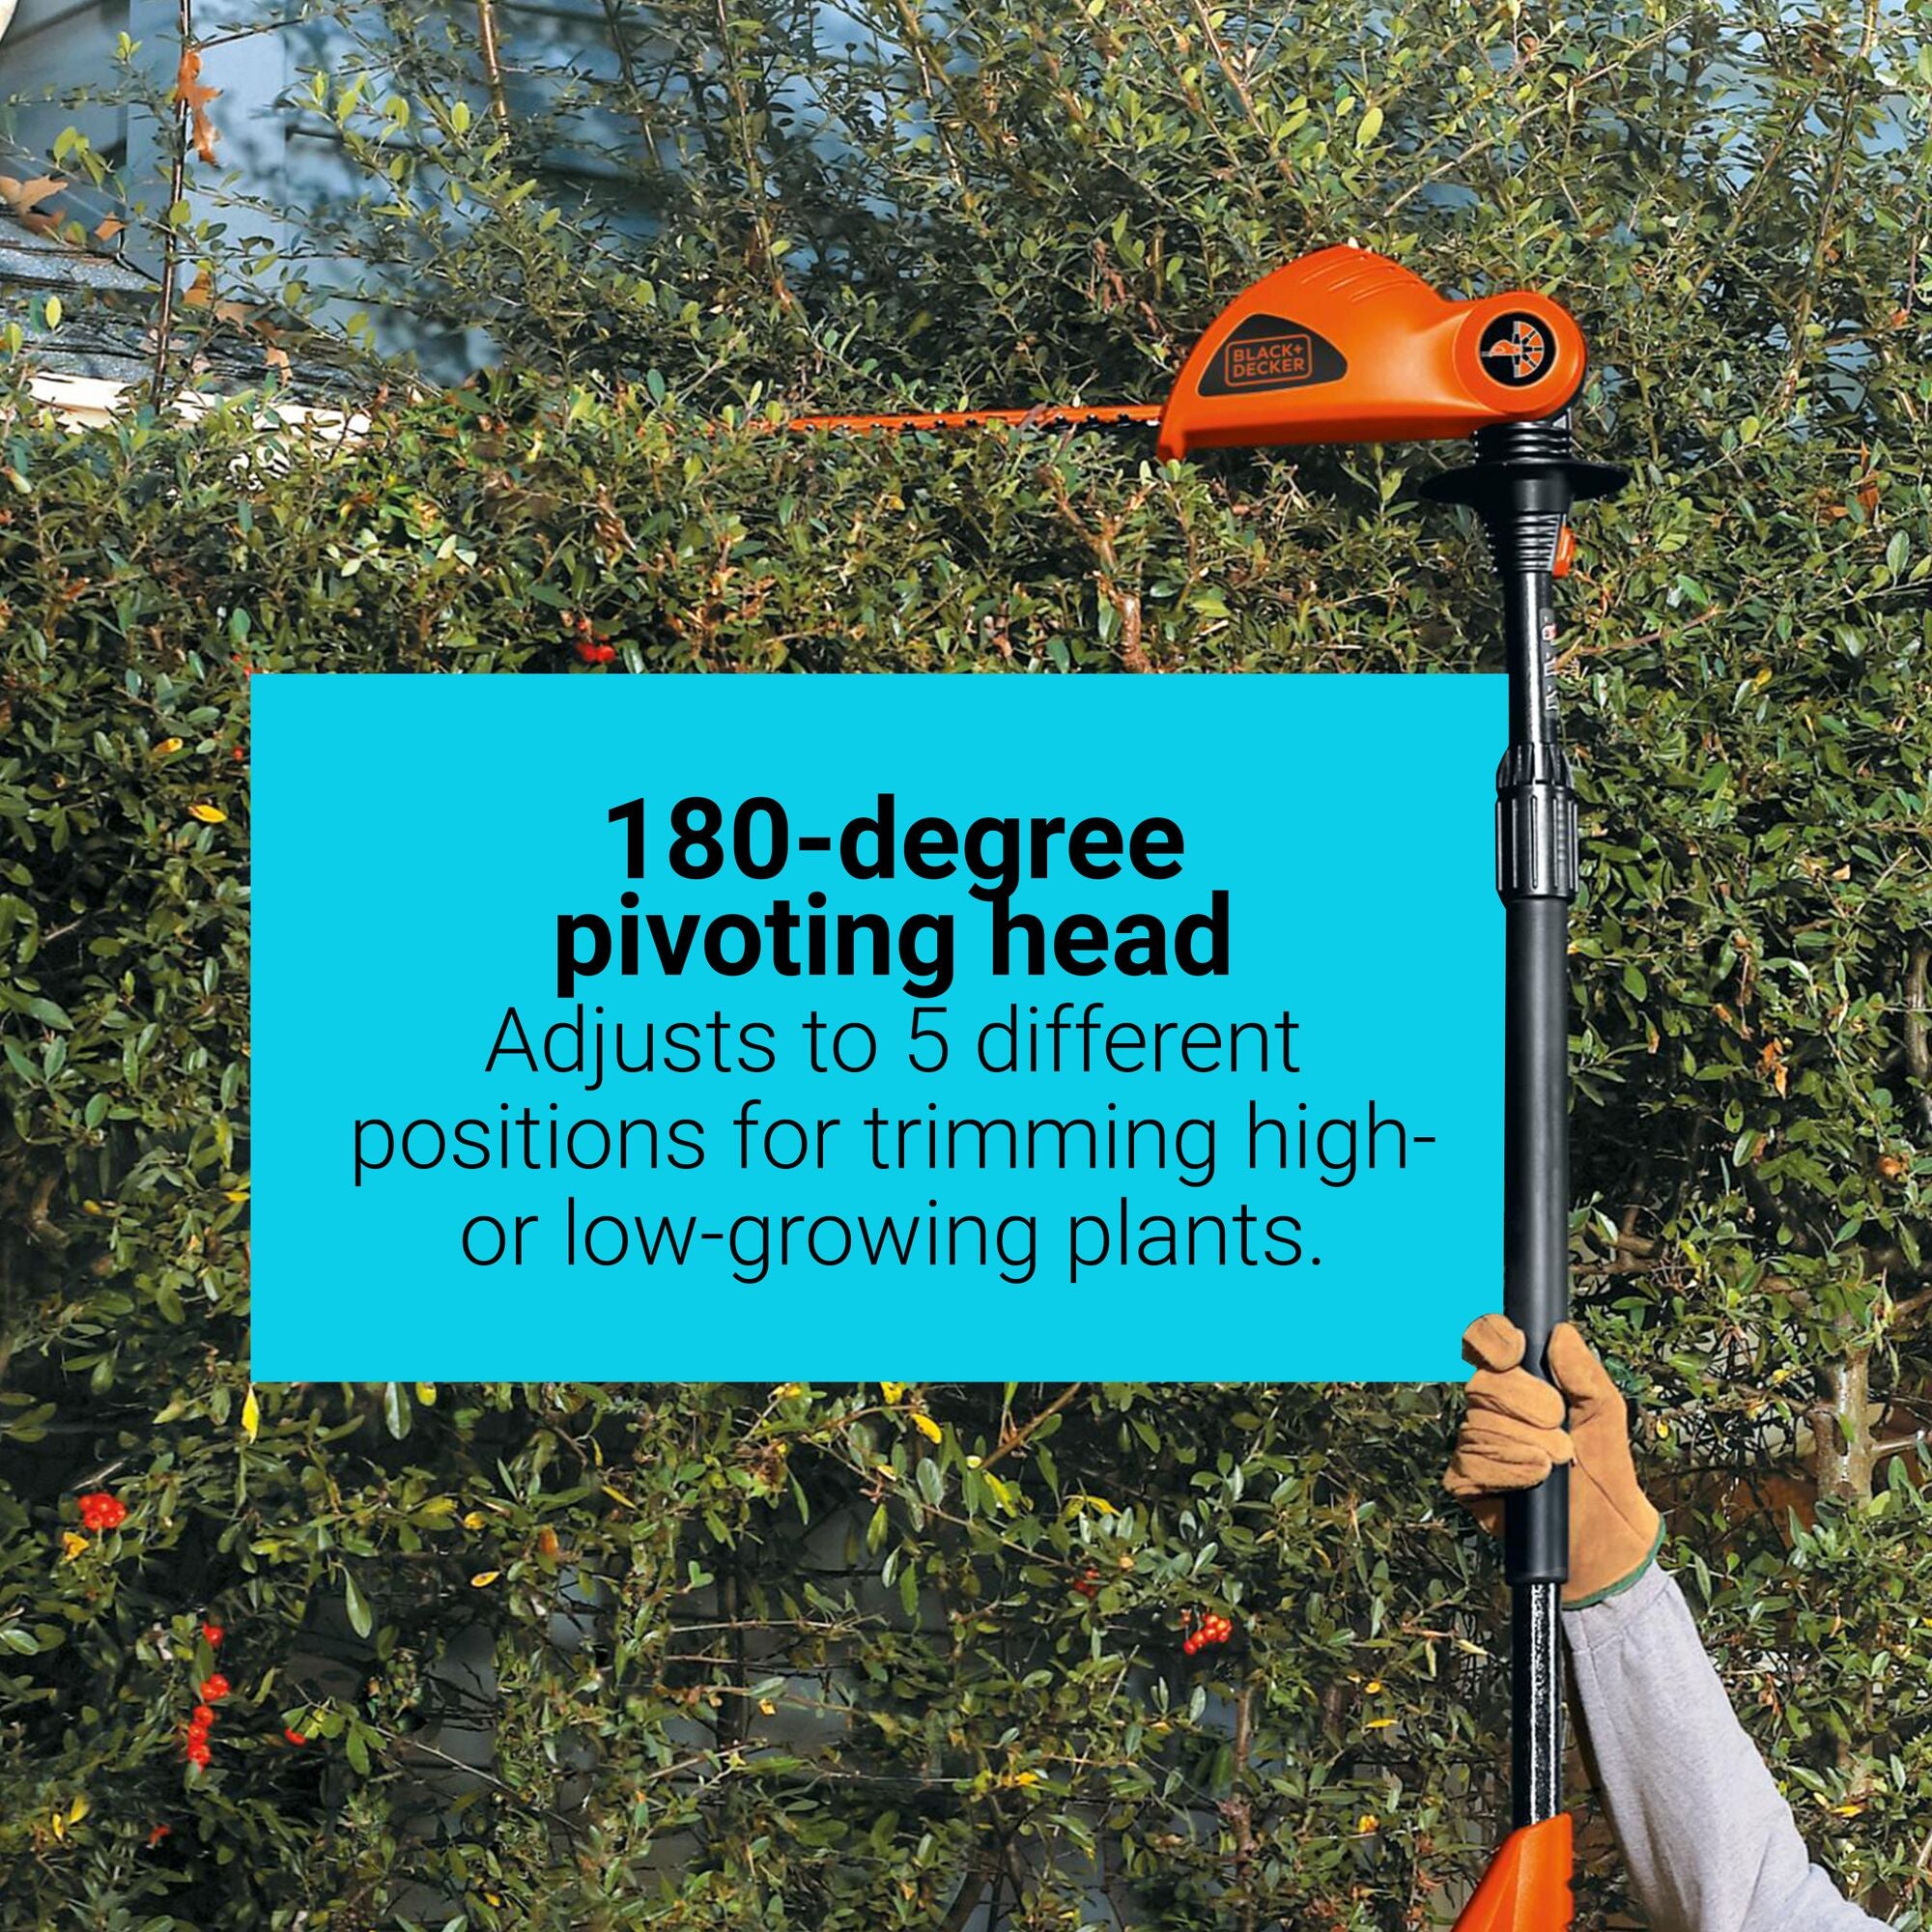 A person cuts high growth with the BLACK+DECKER 20V MAX* POWERCONNECT™ 18-in. Cordless Pole Hedge Trimmer (Tool Only). Lightweight. Weighs only 7.7 lbs for easy maneuvering in hard-to-reach spots.